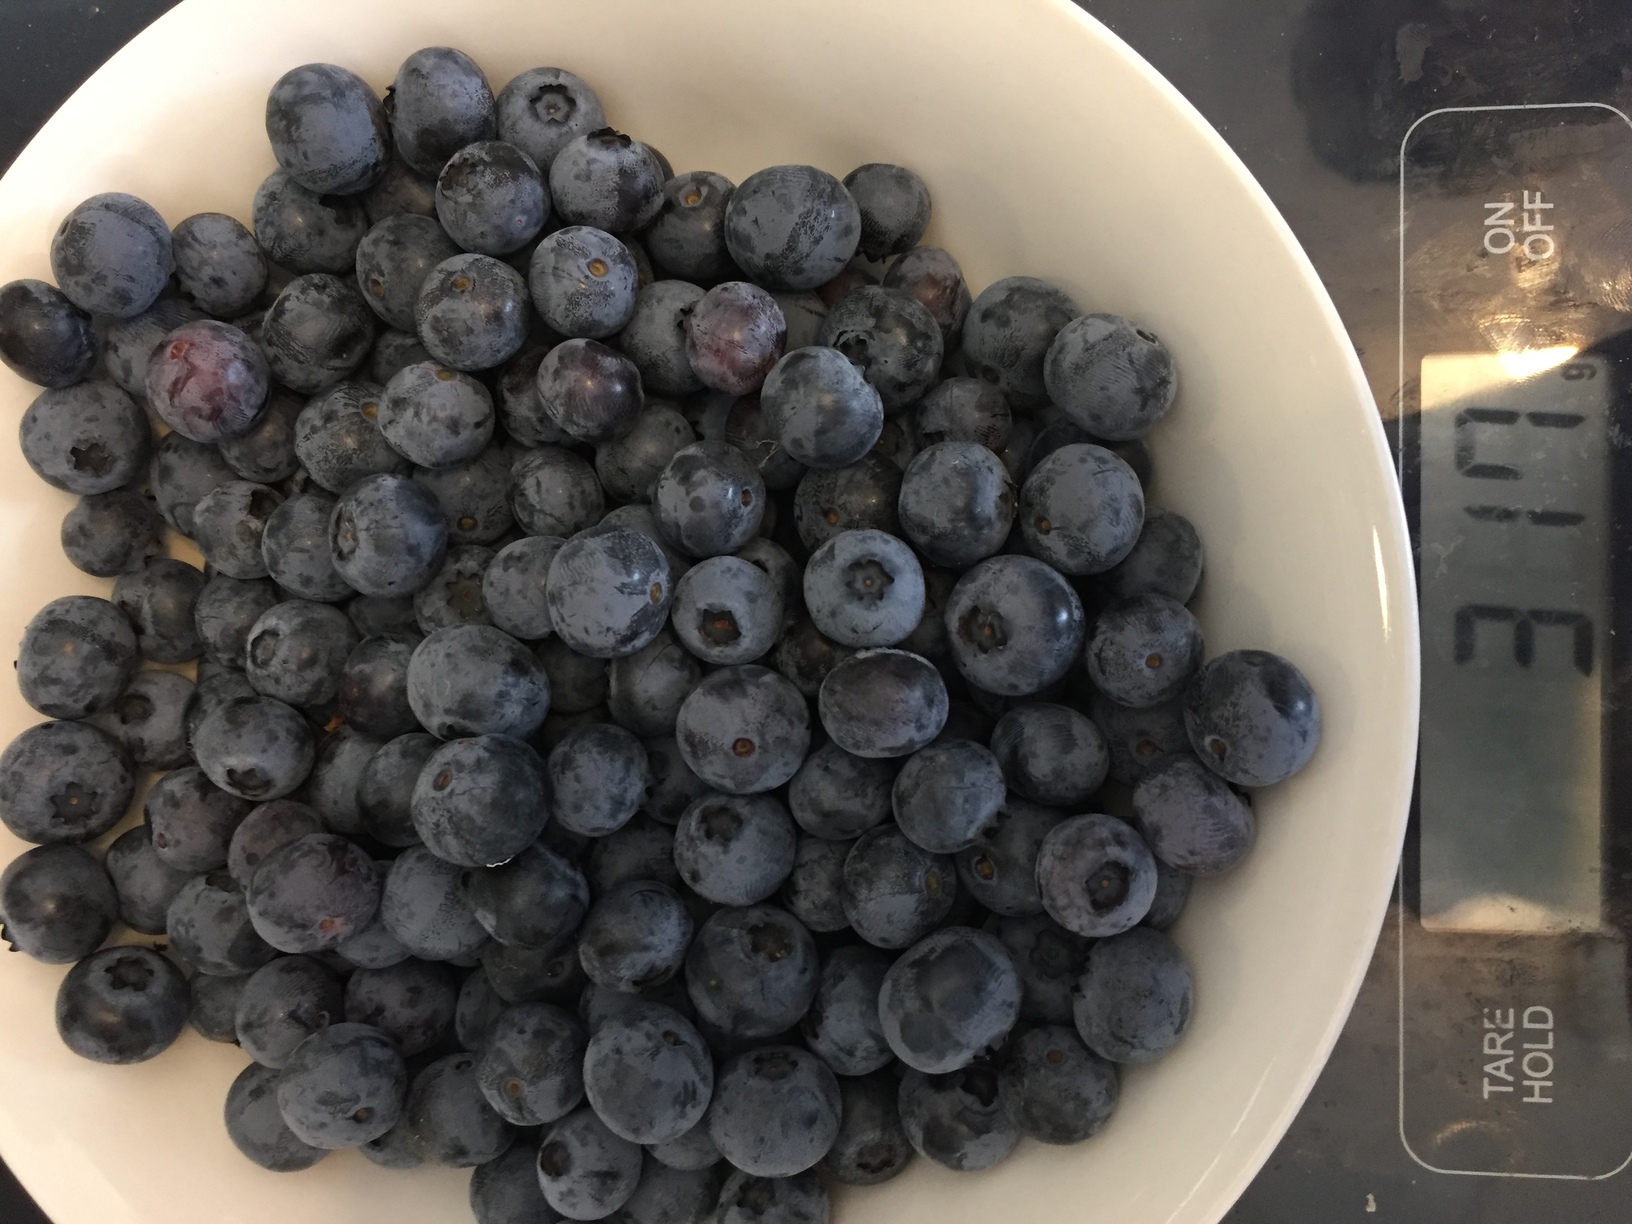 Not a bad haul of blueberries that day